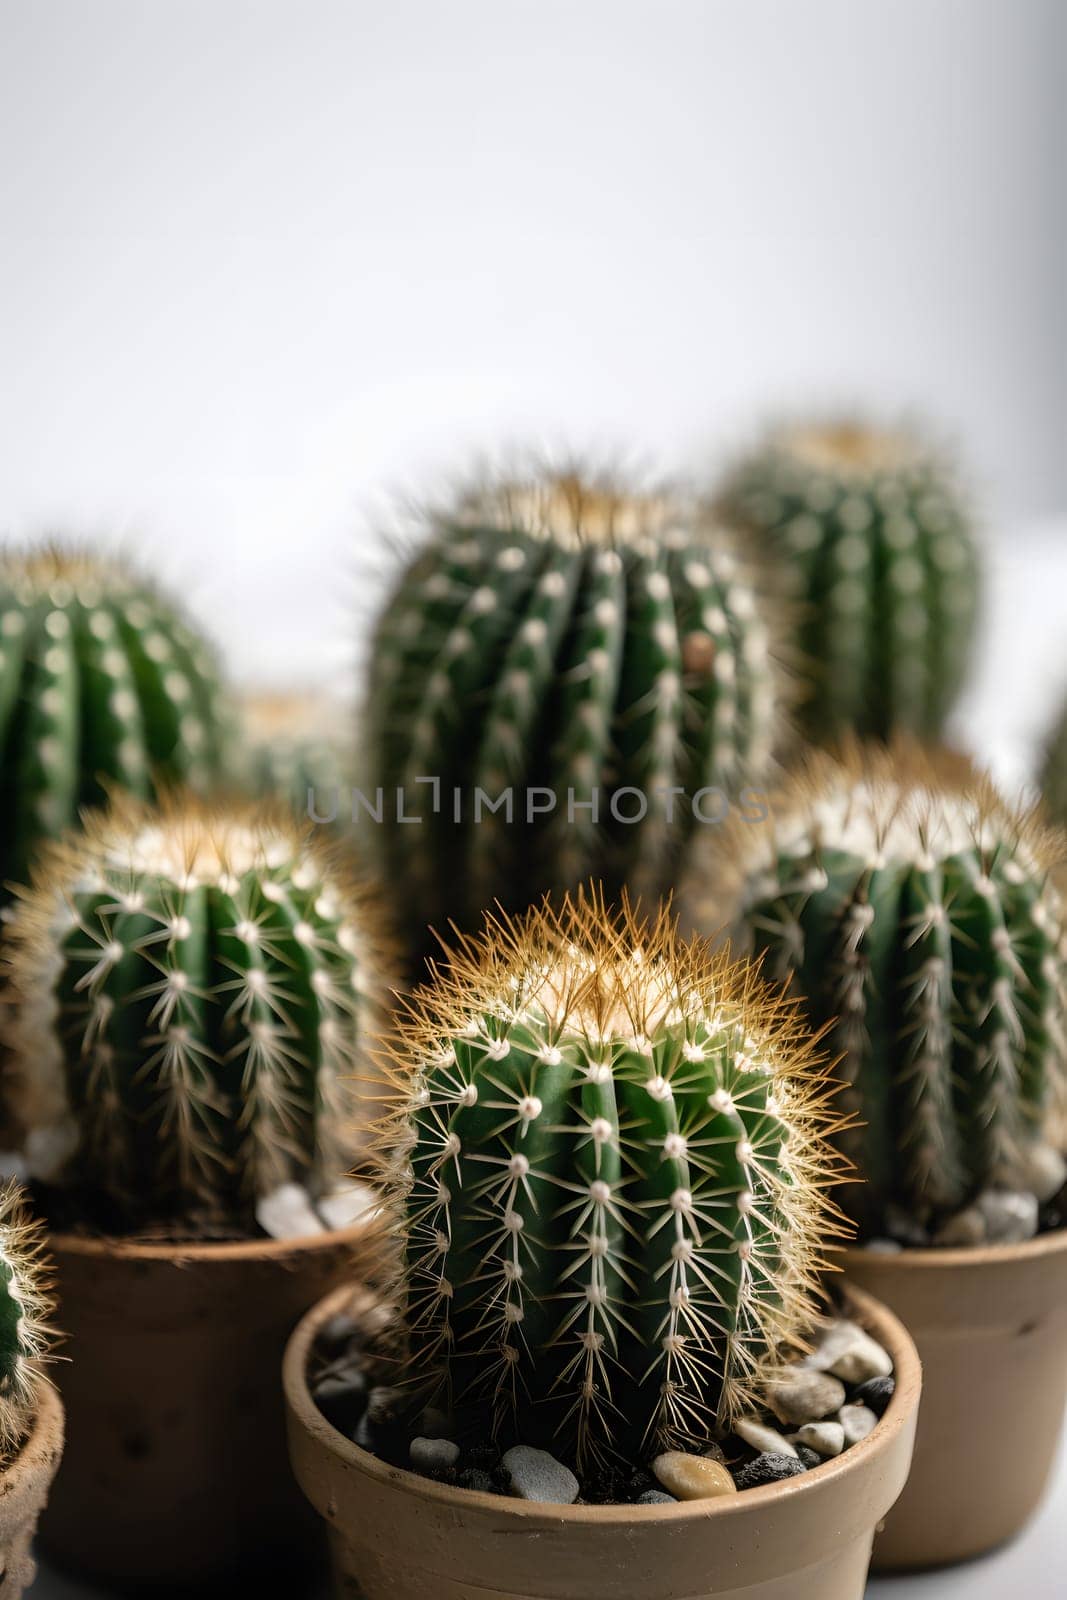 group of several round indoor plant cactuses in pot on white background. Neural network generated in May 2023. Not based on any actual object, scene or pattern.